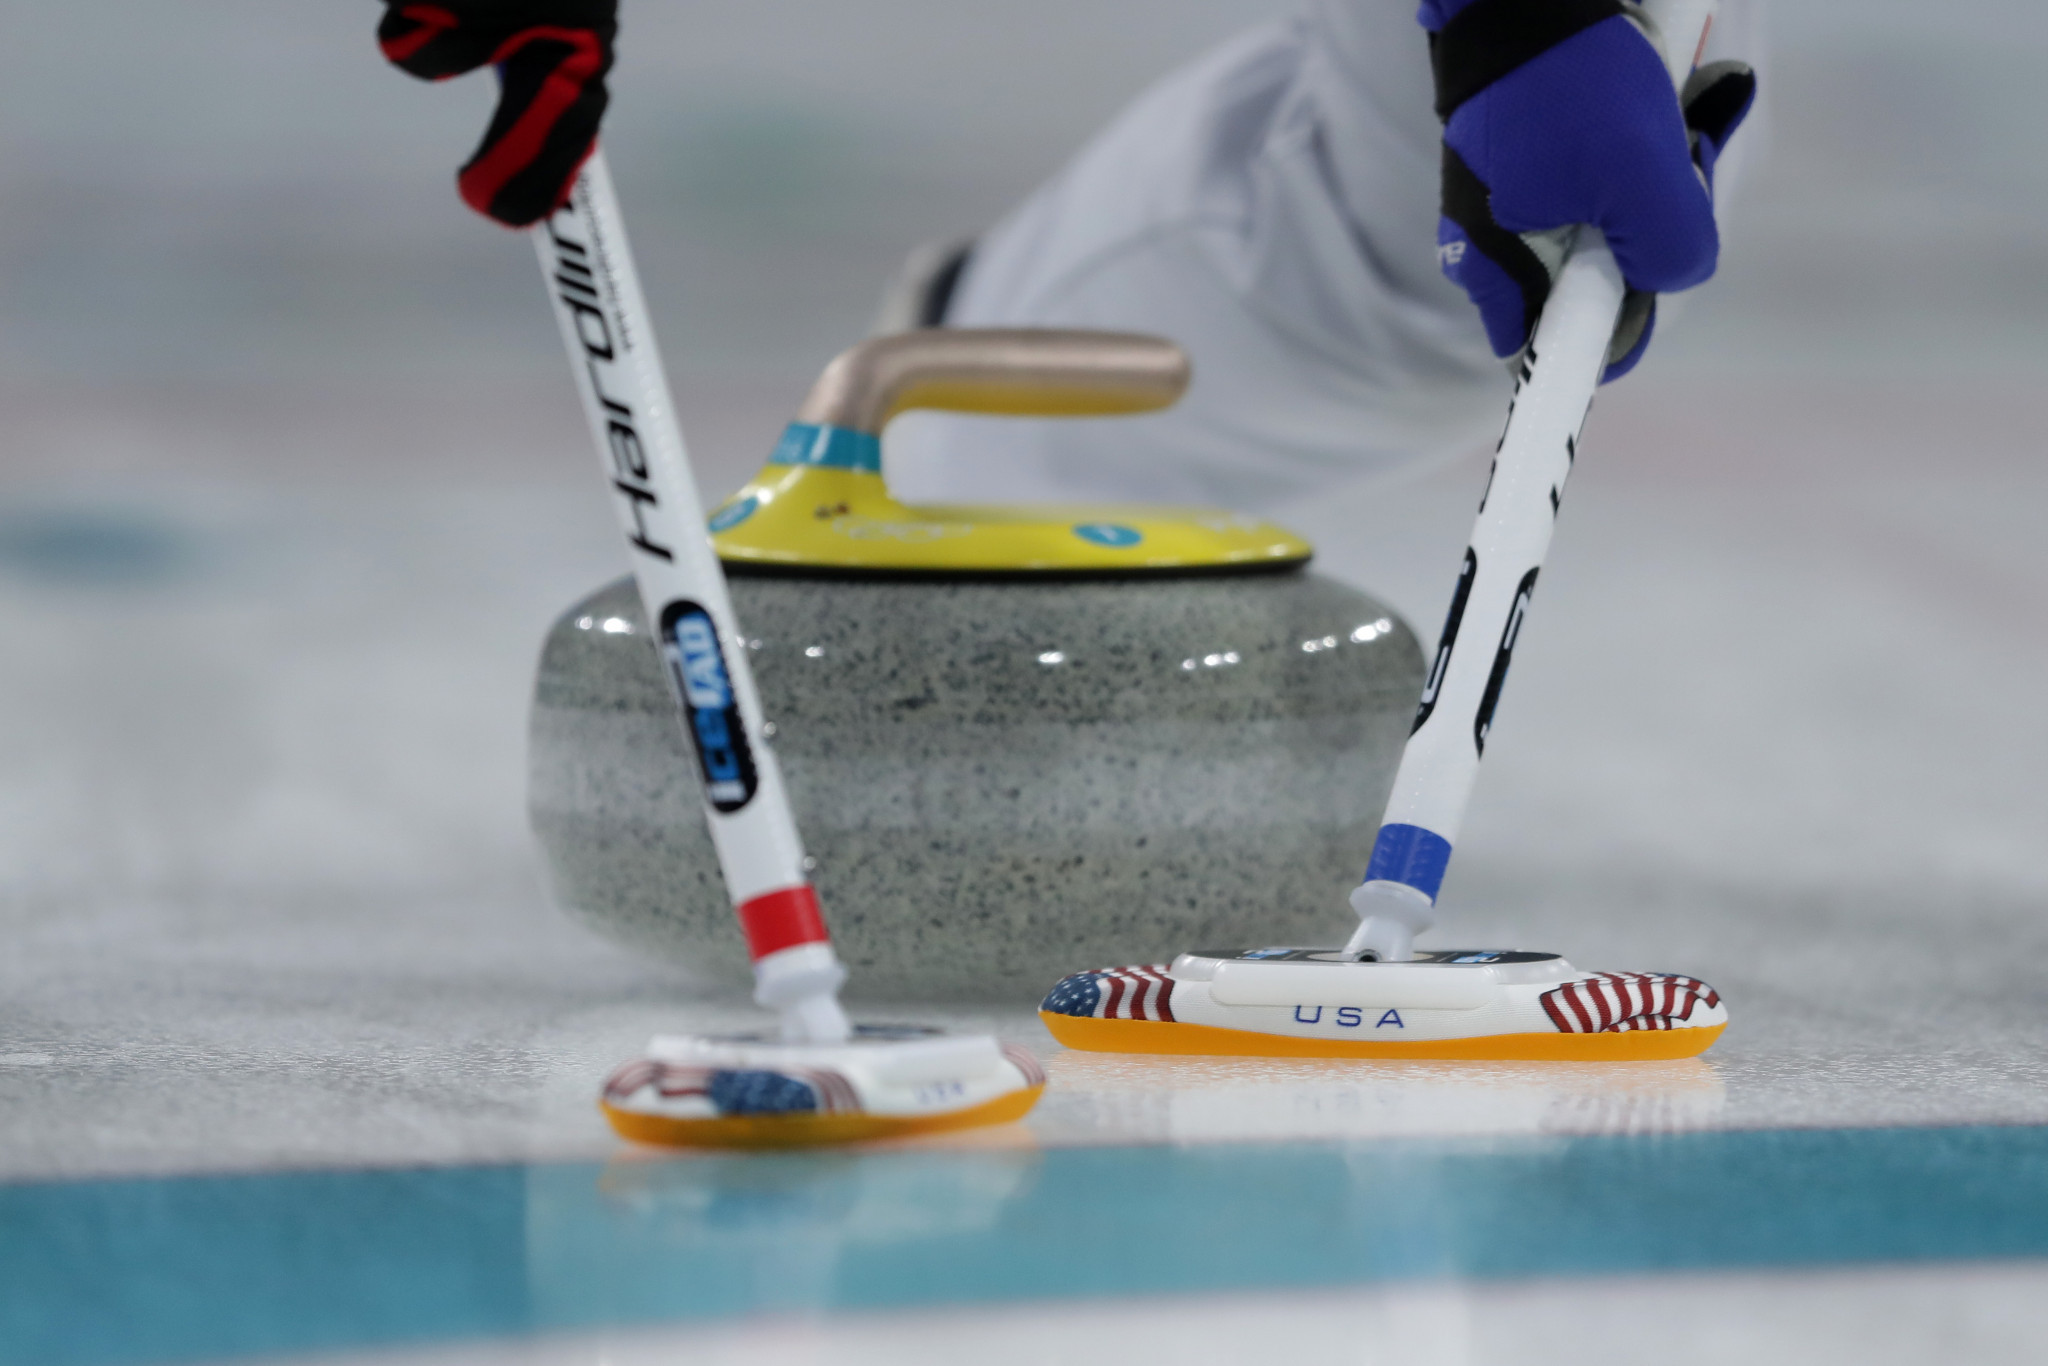 Christopher Hamilton will aim to raise the profile of curling in the lead-up to the Beijing 2022 Winter Olympics ©Getty Images